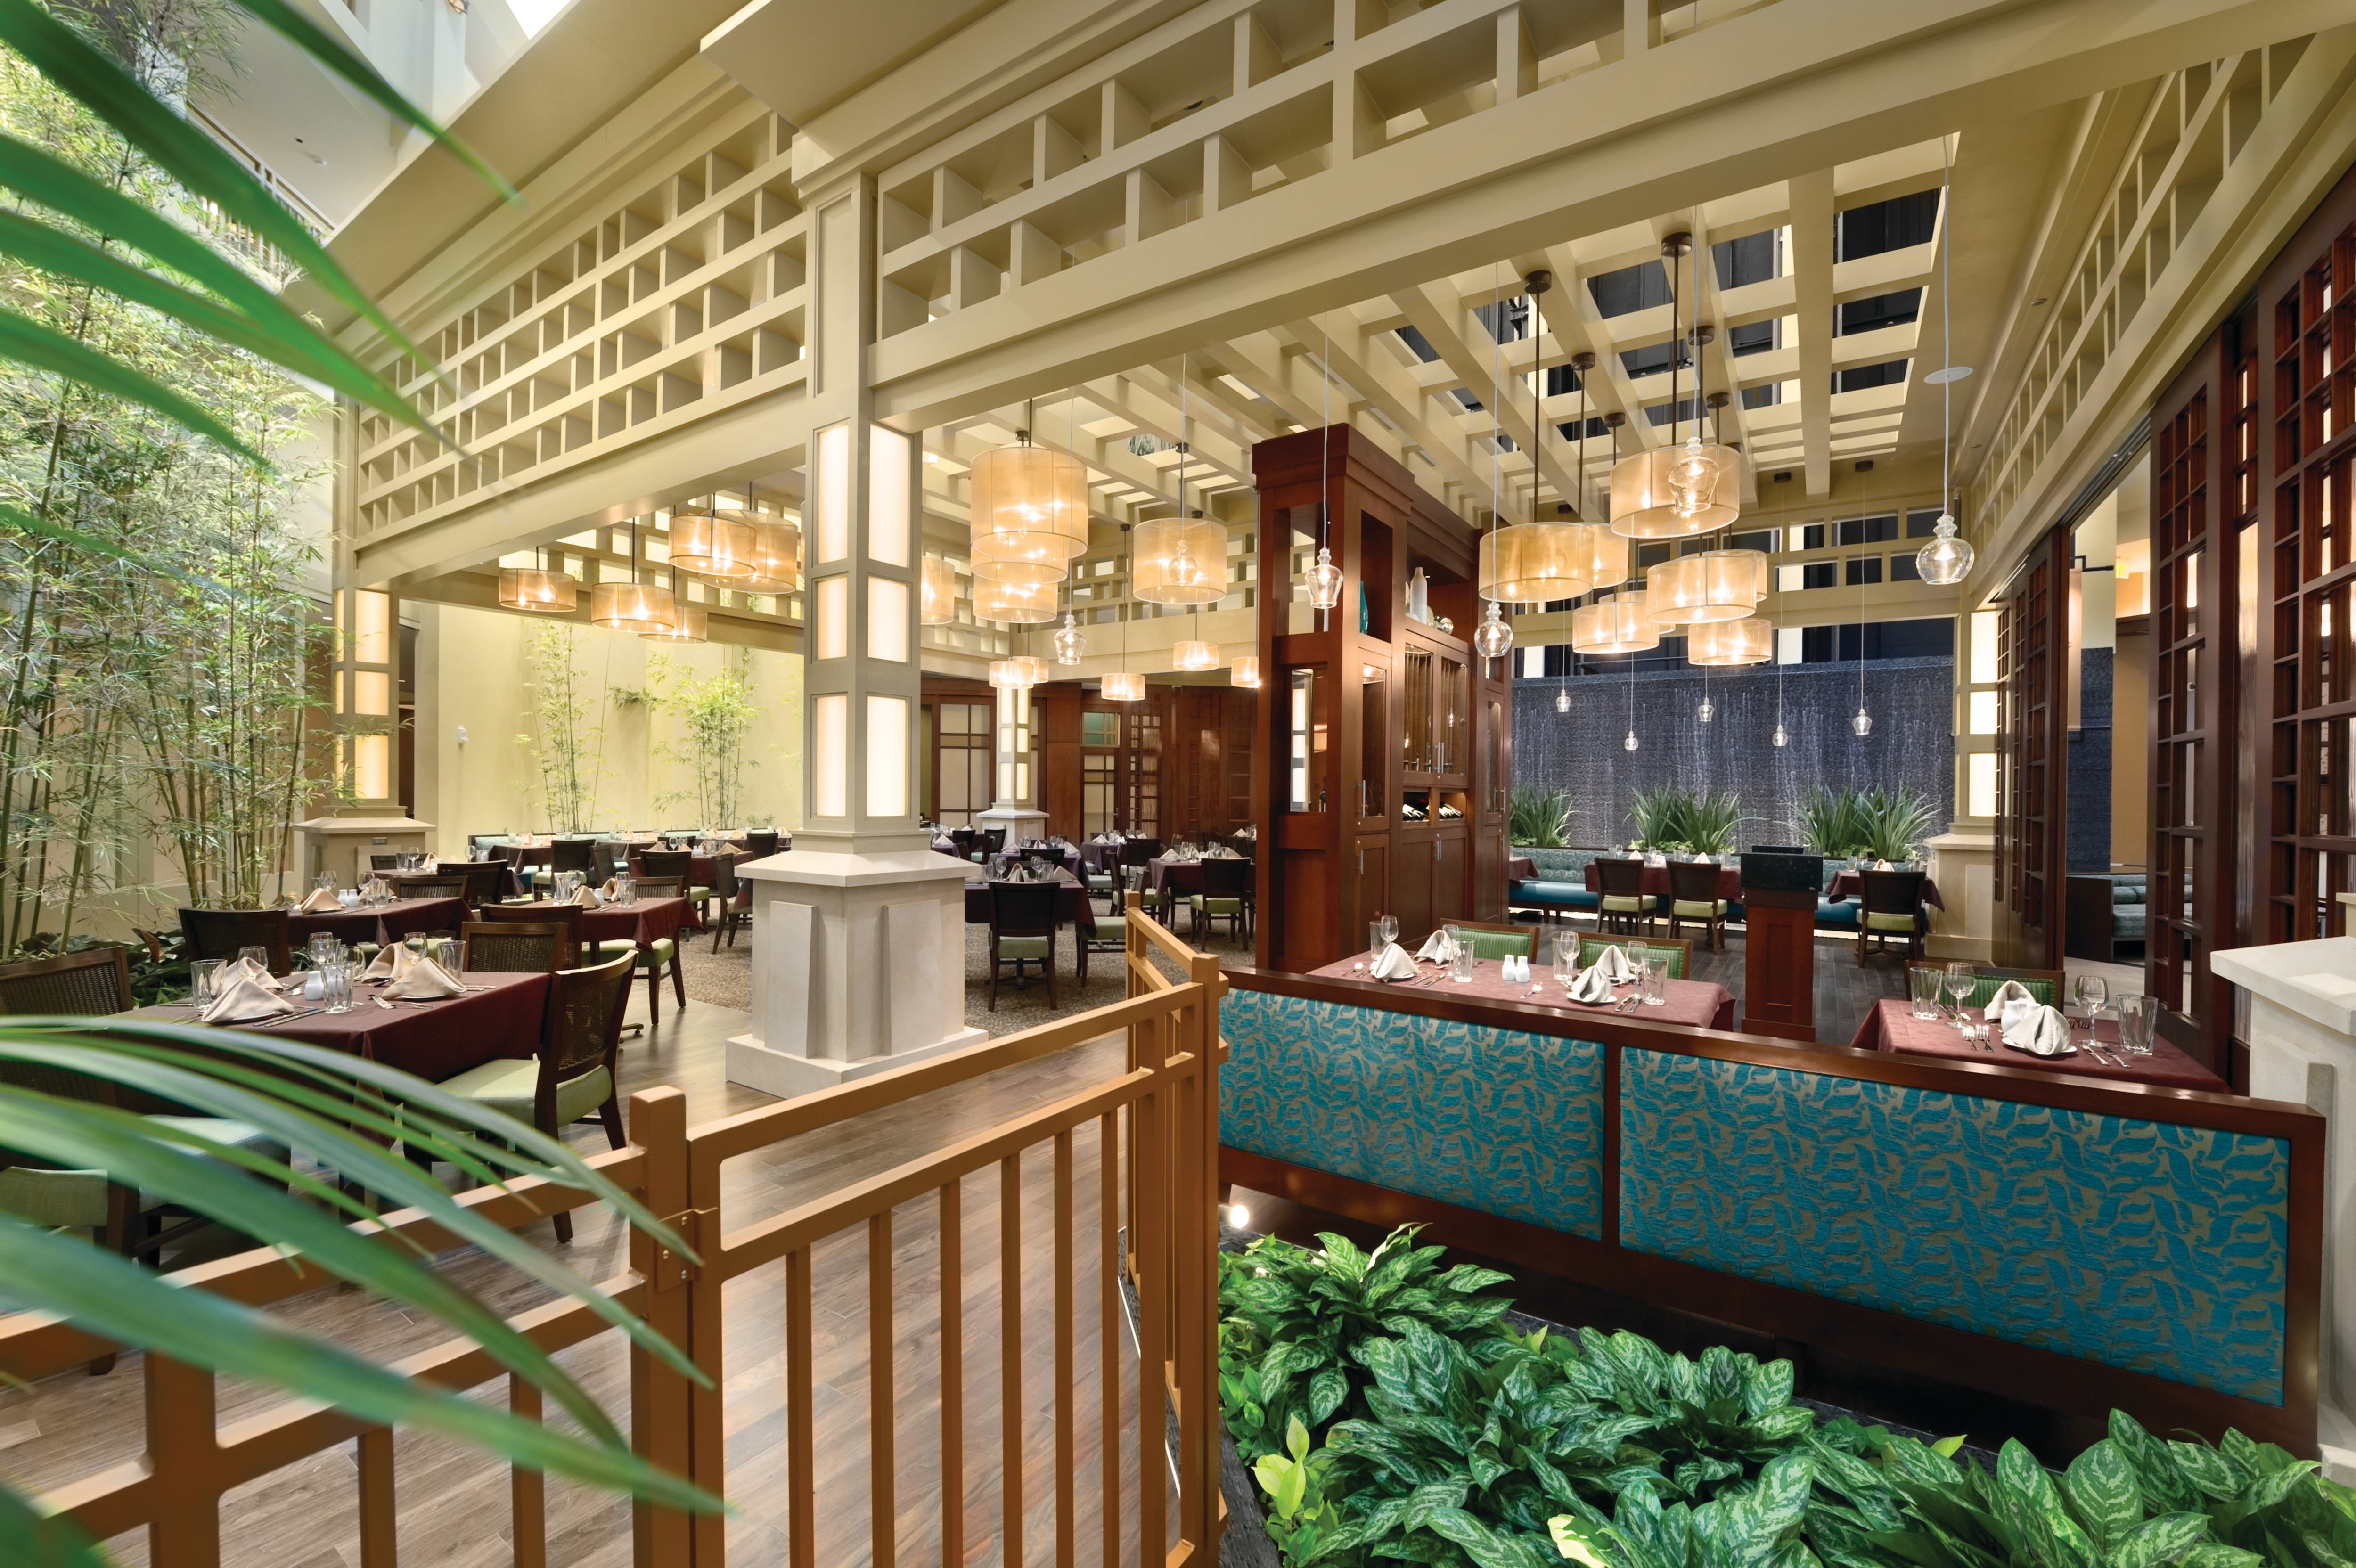 Kyngs Grille Atrium Restaurant with Dining Area